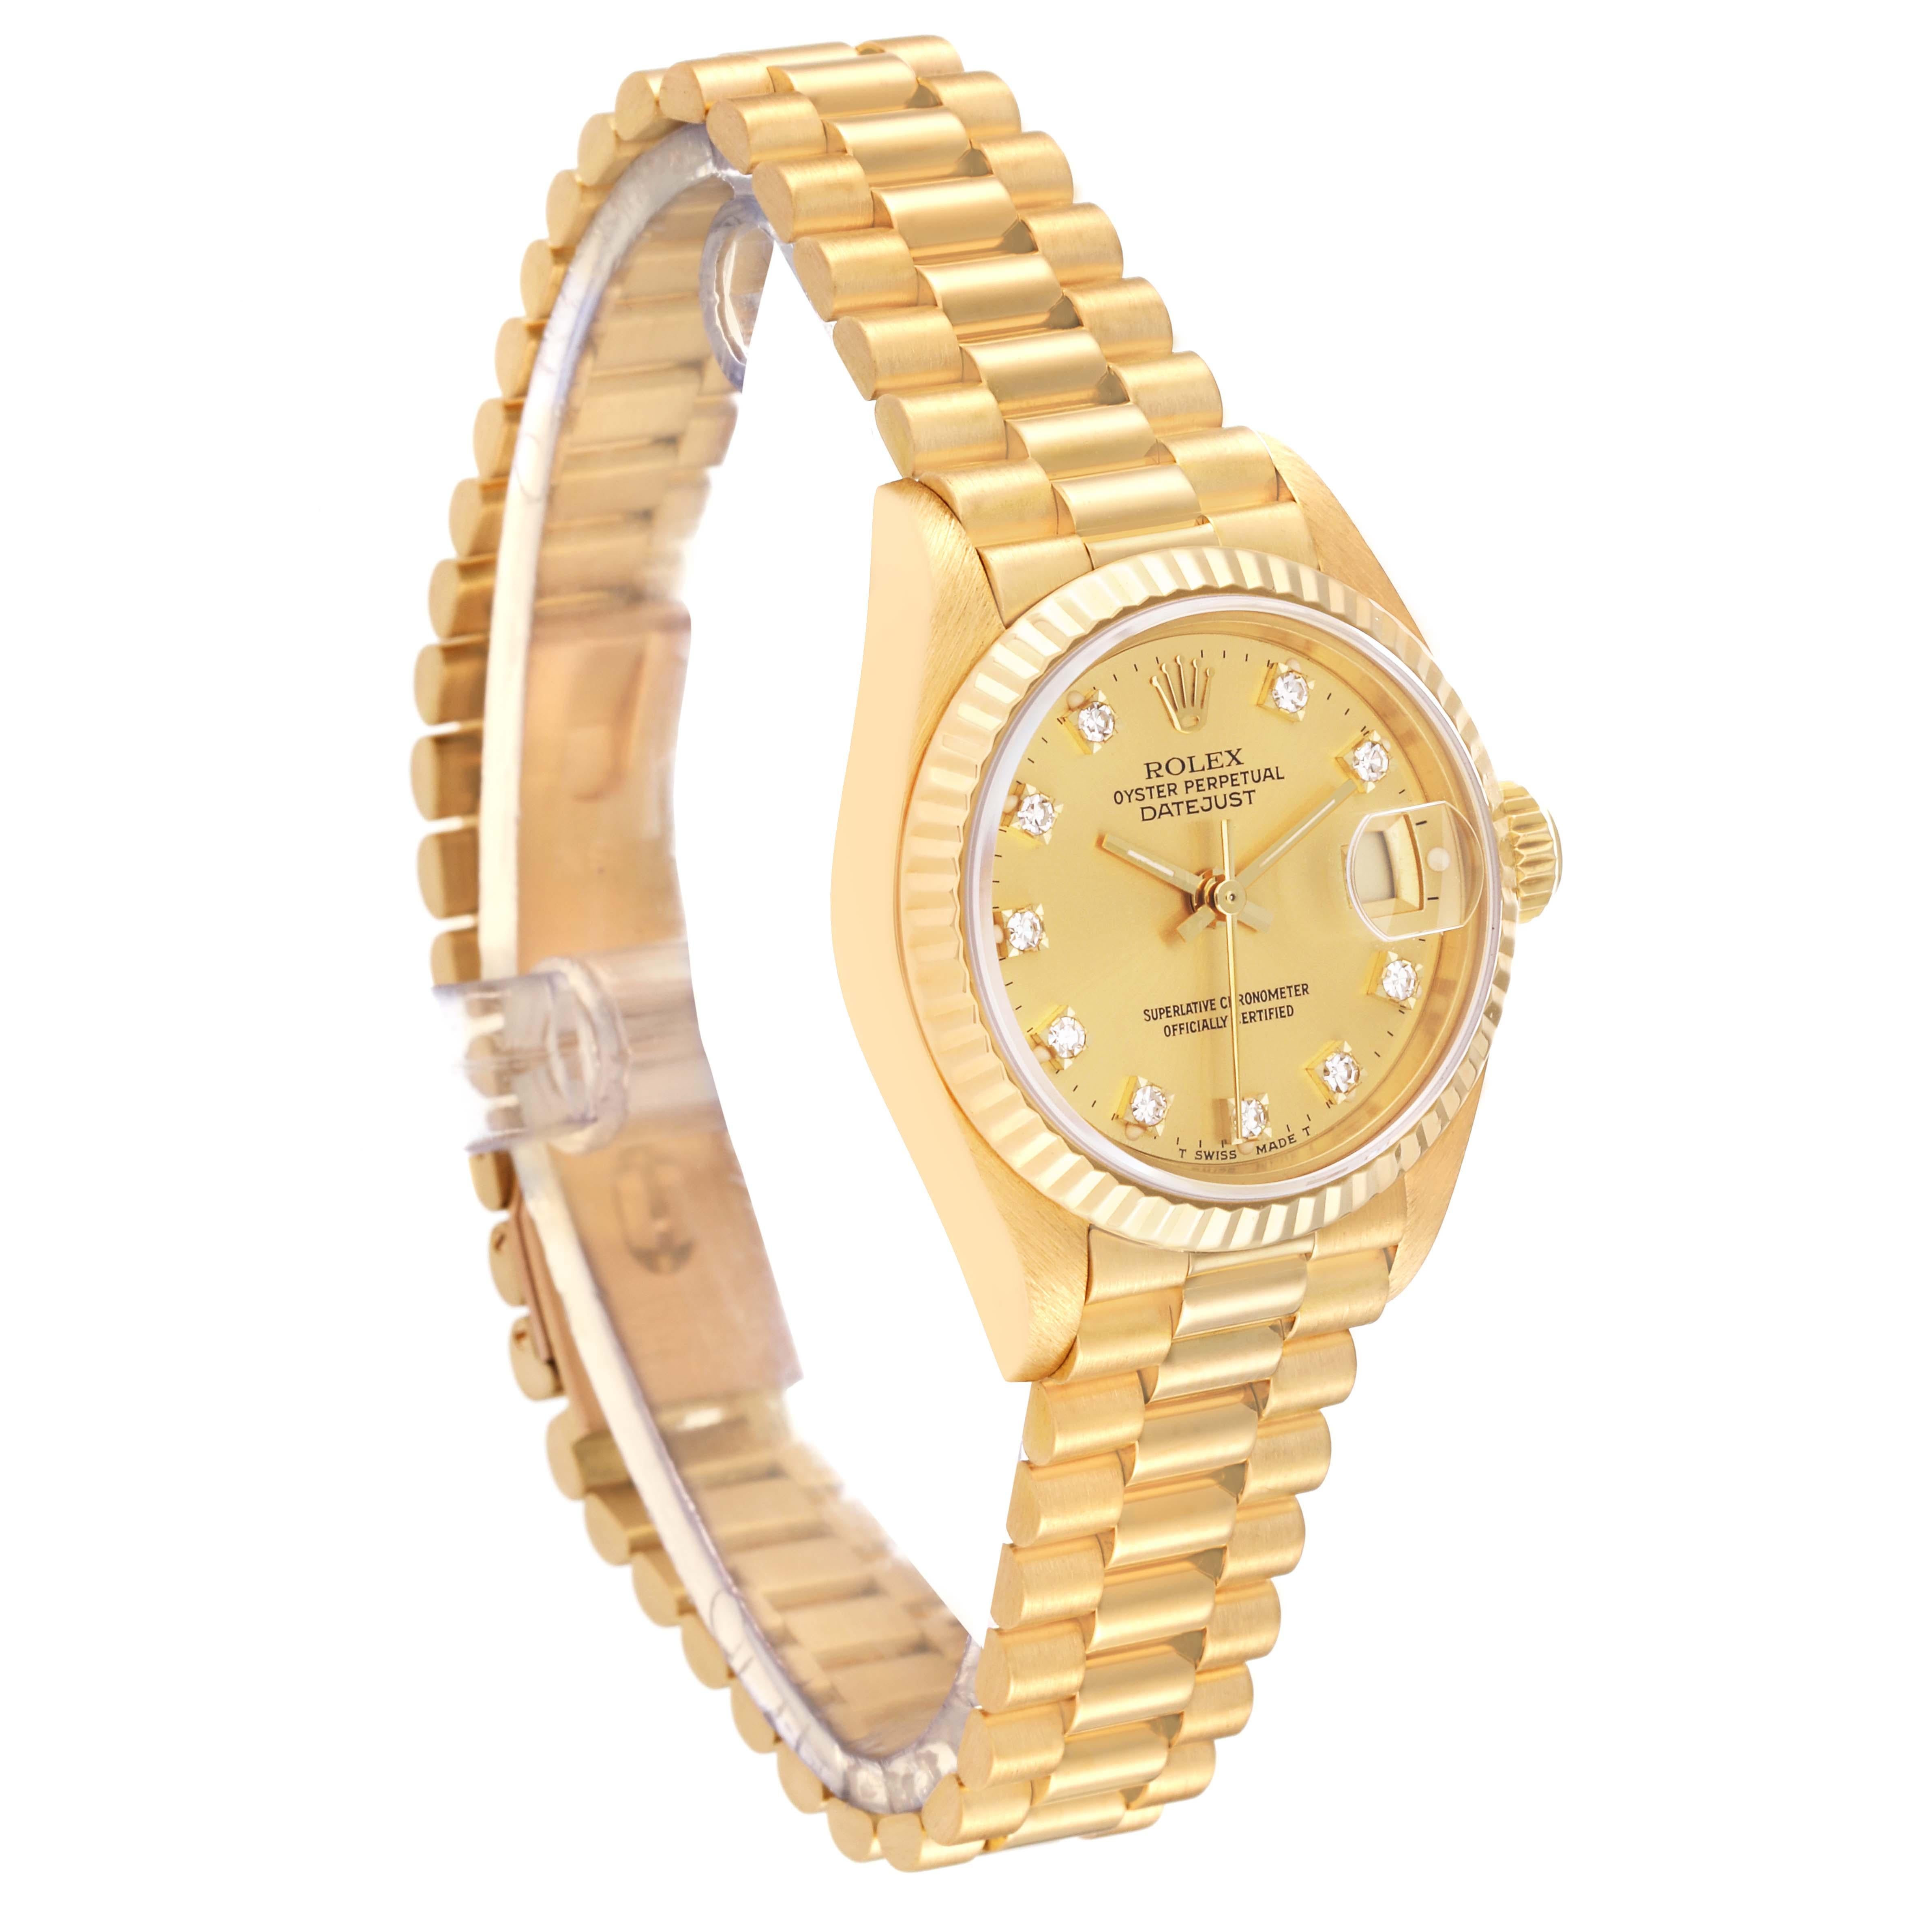 Rolex Datejust President Yellow Gold Diamond Dial Ladies Watch 69178 In Excellent Condition For Sale In Atlanta, GA